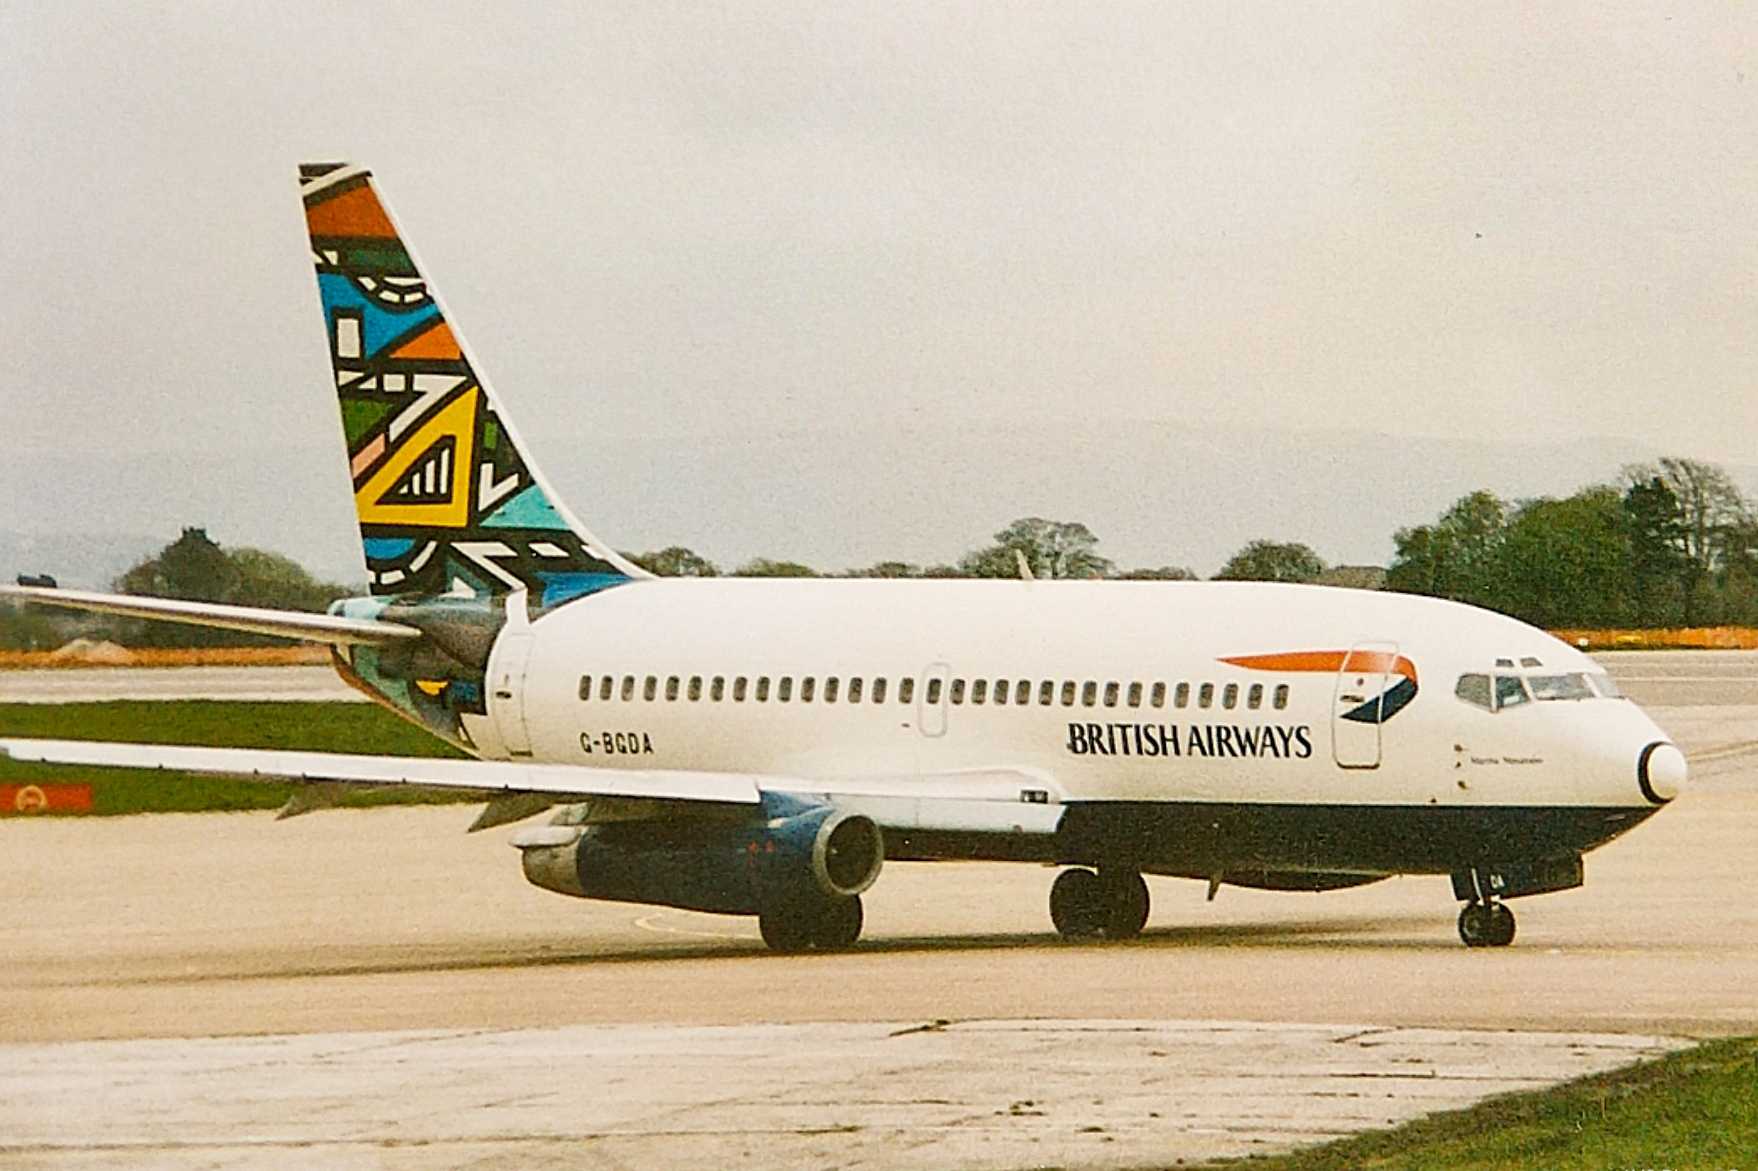 ZS-SIT/ZSSIT Africa Charter Airlines Boeing 737 Airframe Information - AVSpotters.com